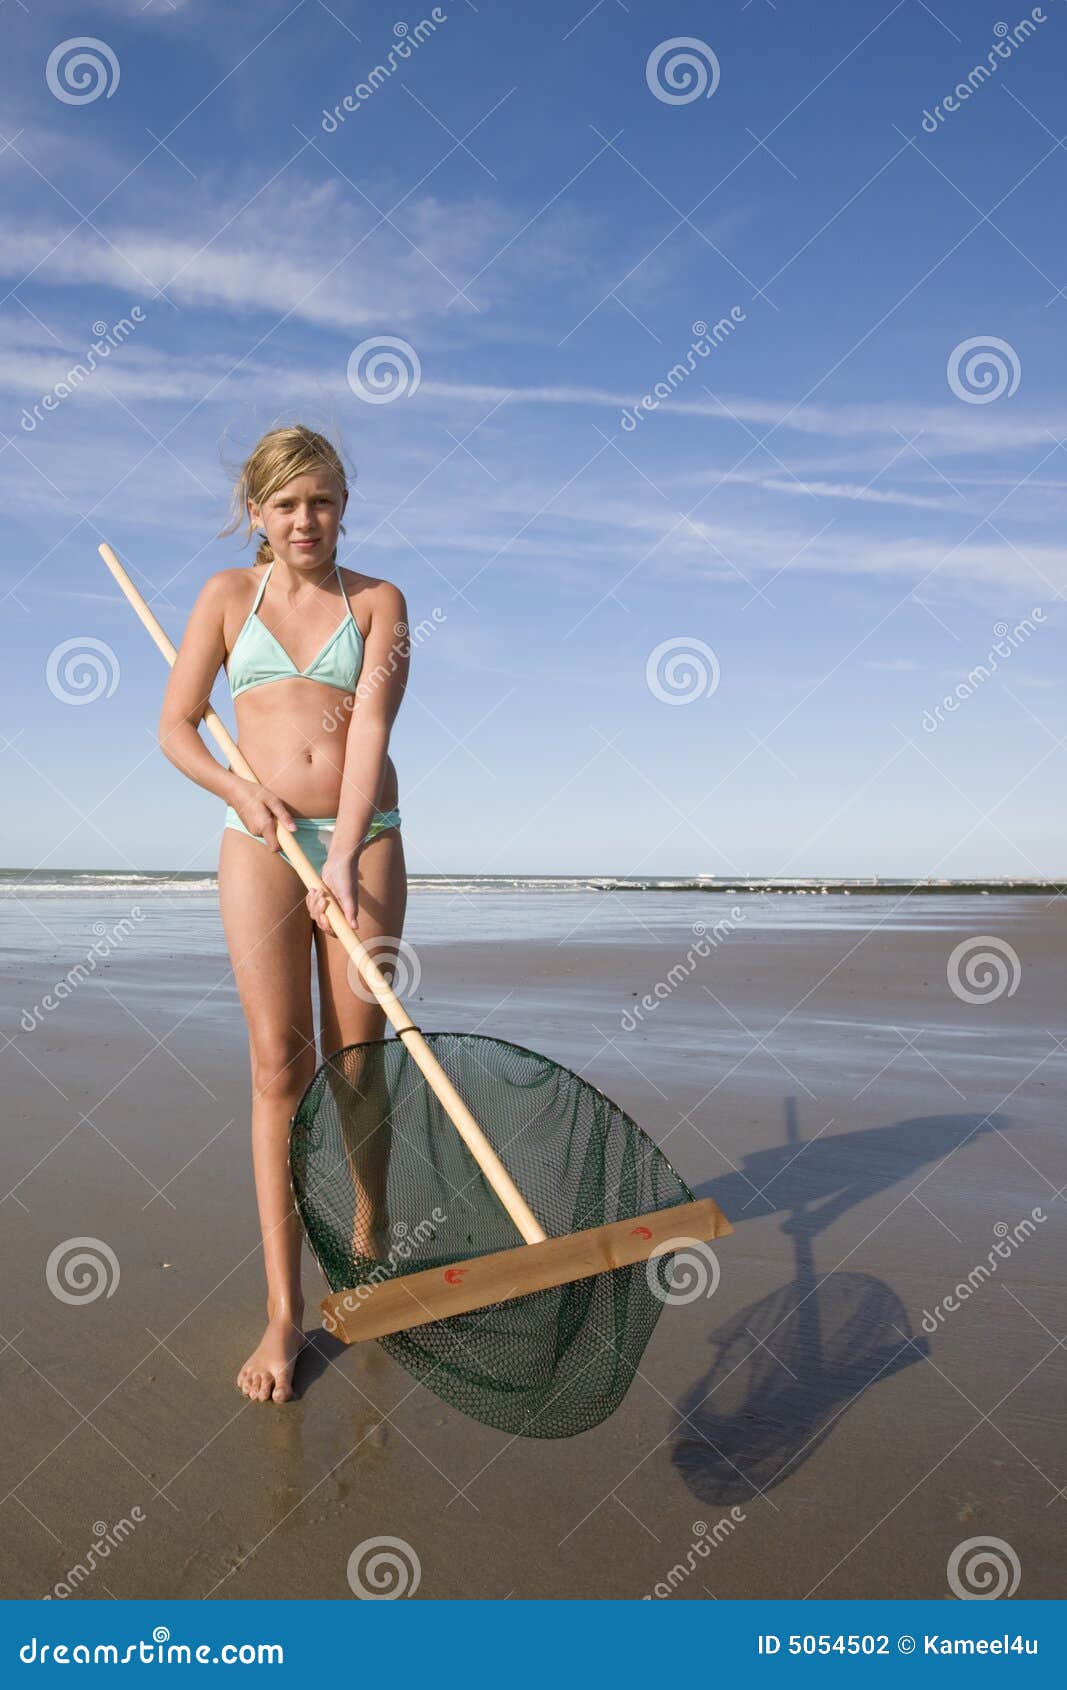 Girl Showing Her Fishing Net at the Beach Stock Photo - Image of beach,  body: 5054502